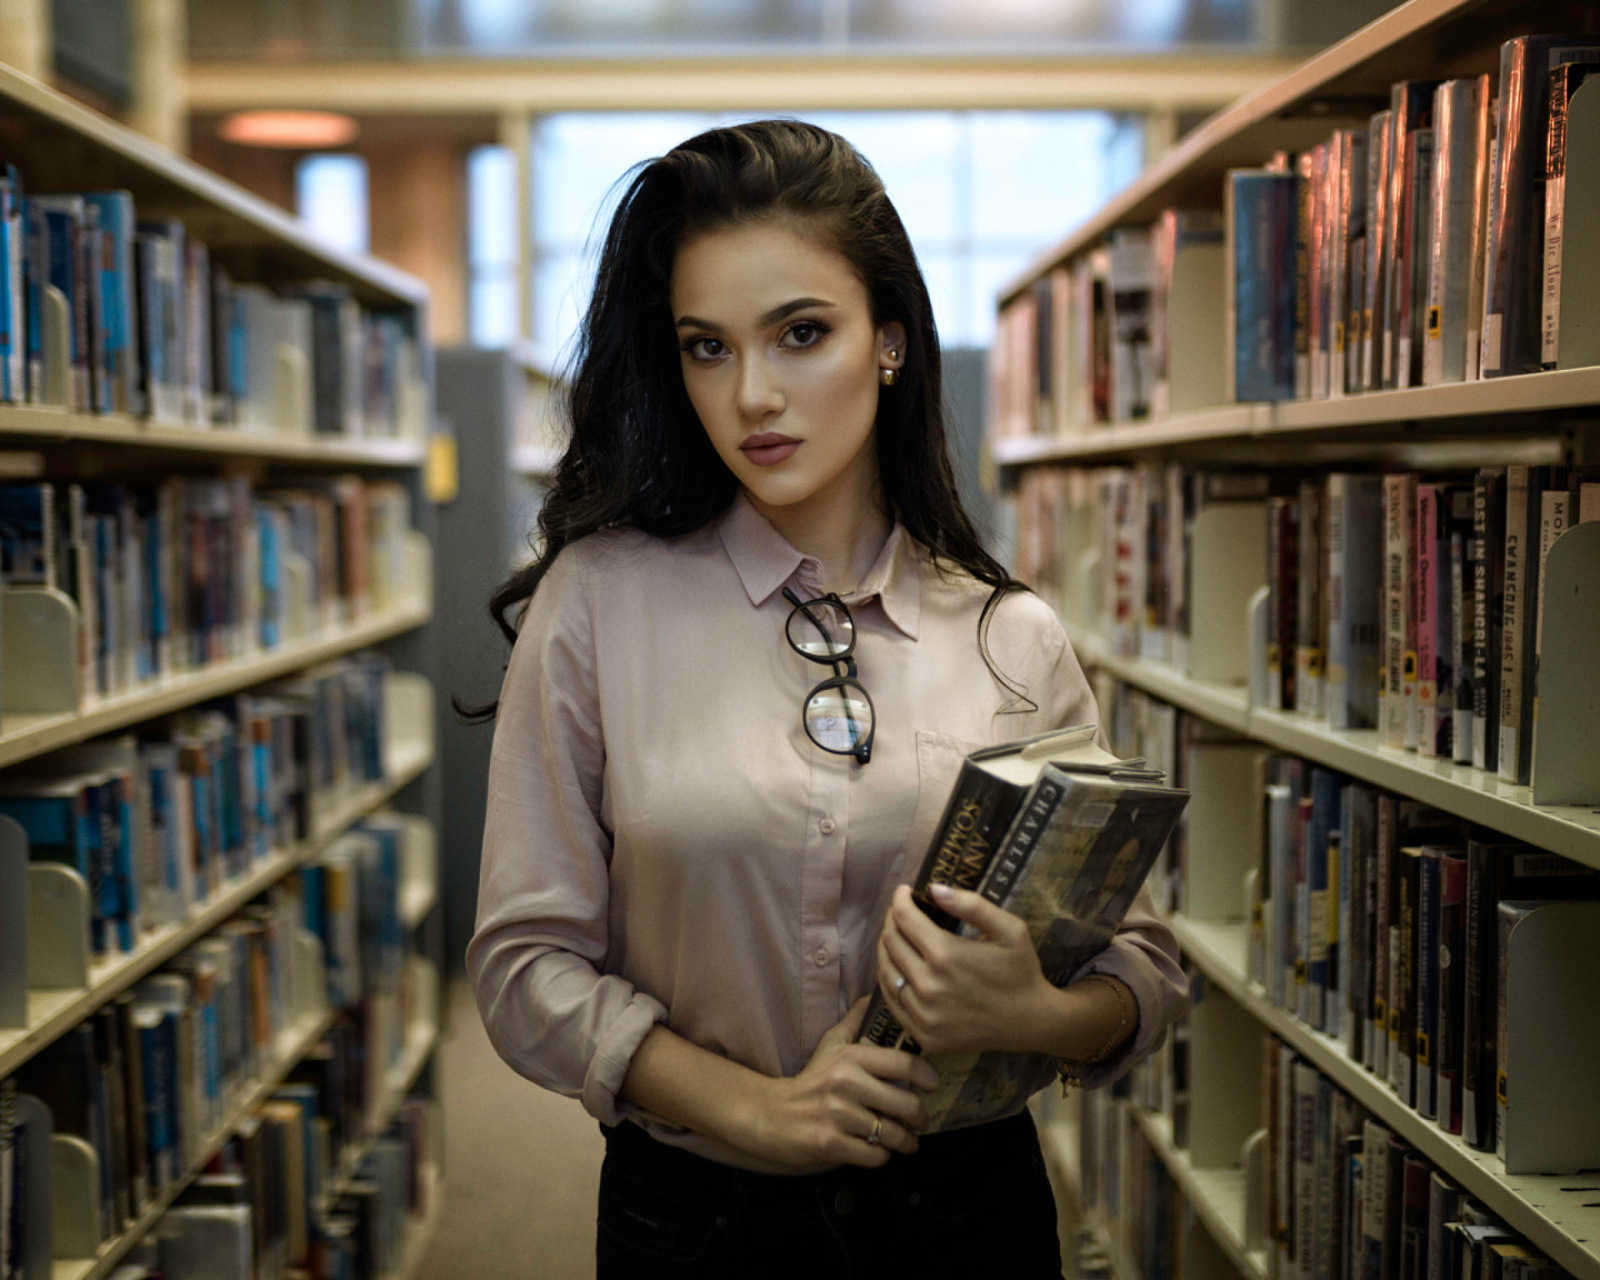 Girl with books in library screenshot #1 1600x1280